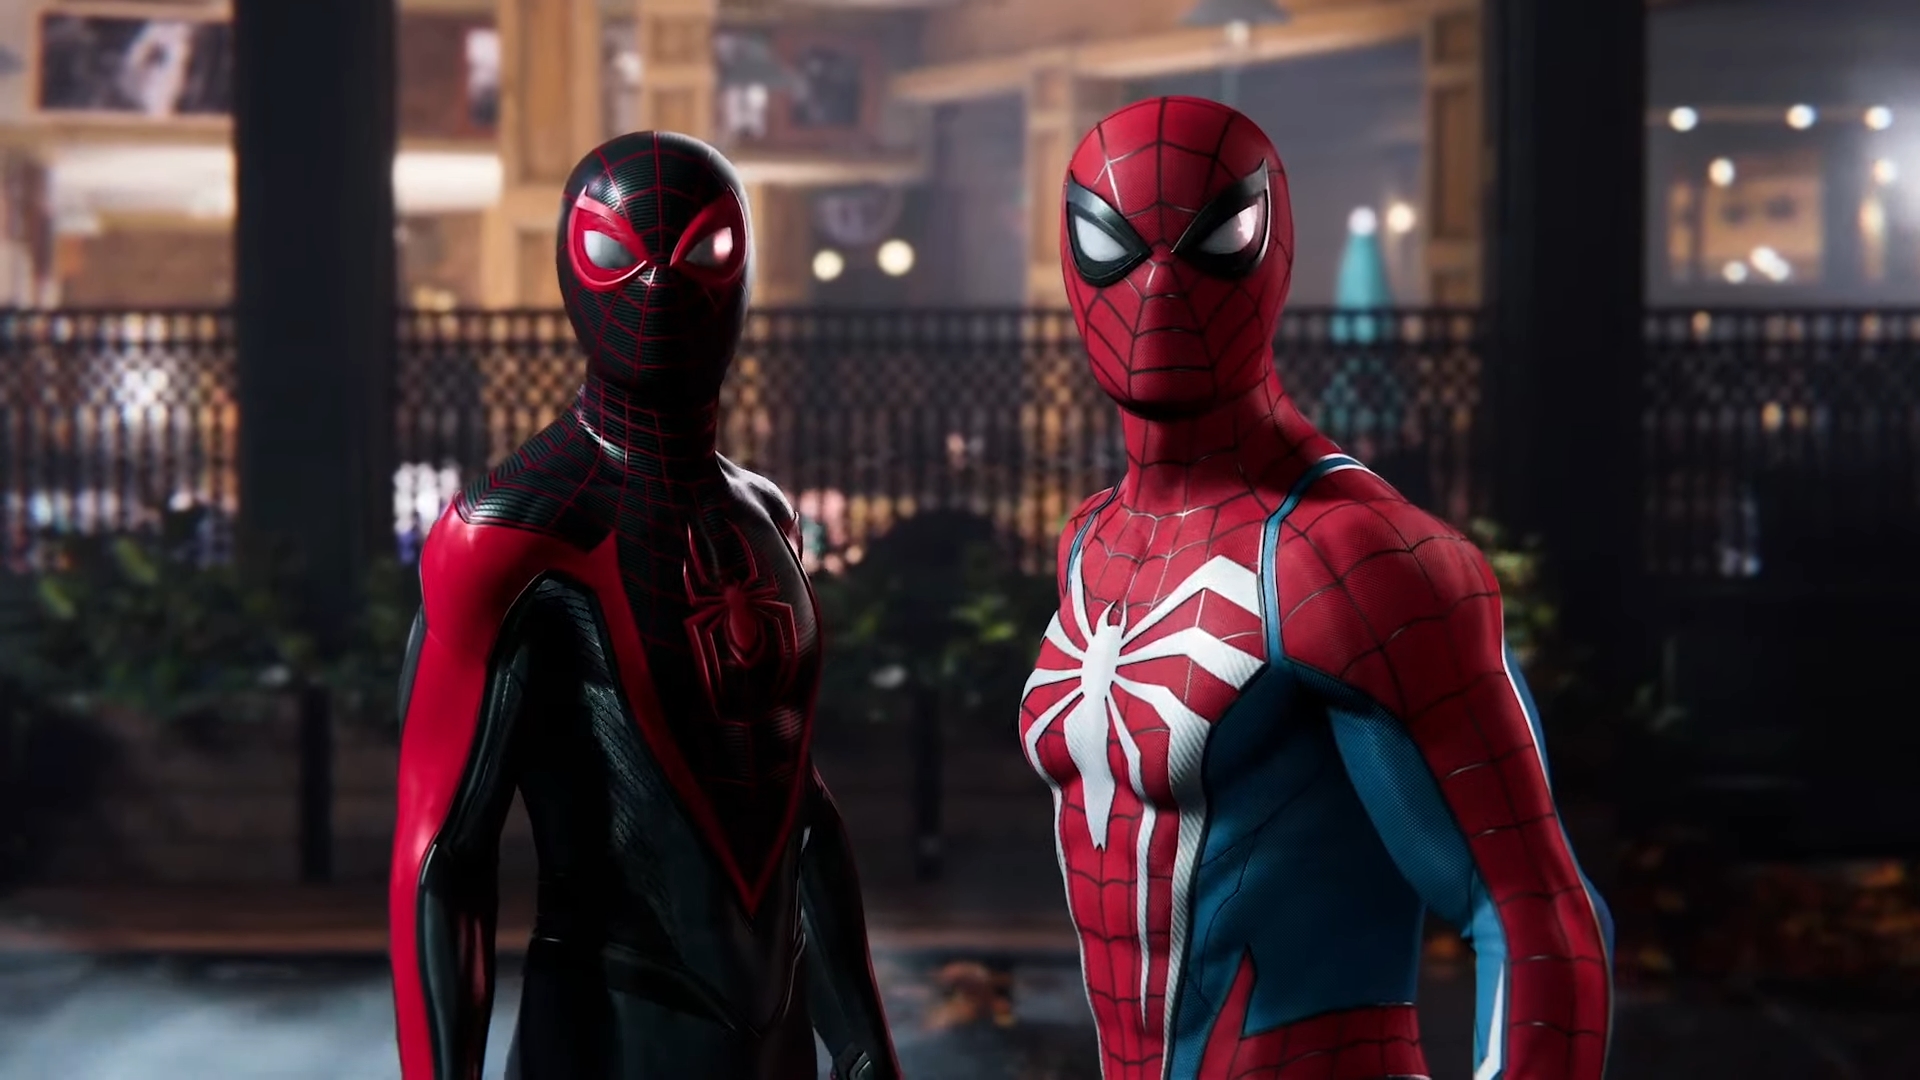 A screenshot from Marvel's Spider-Man 2 showing Peter Parker and Miles Morales standing side by side in their respective Spider-Man suits